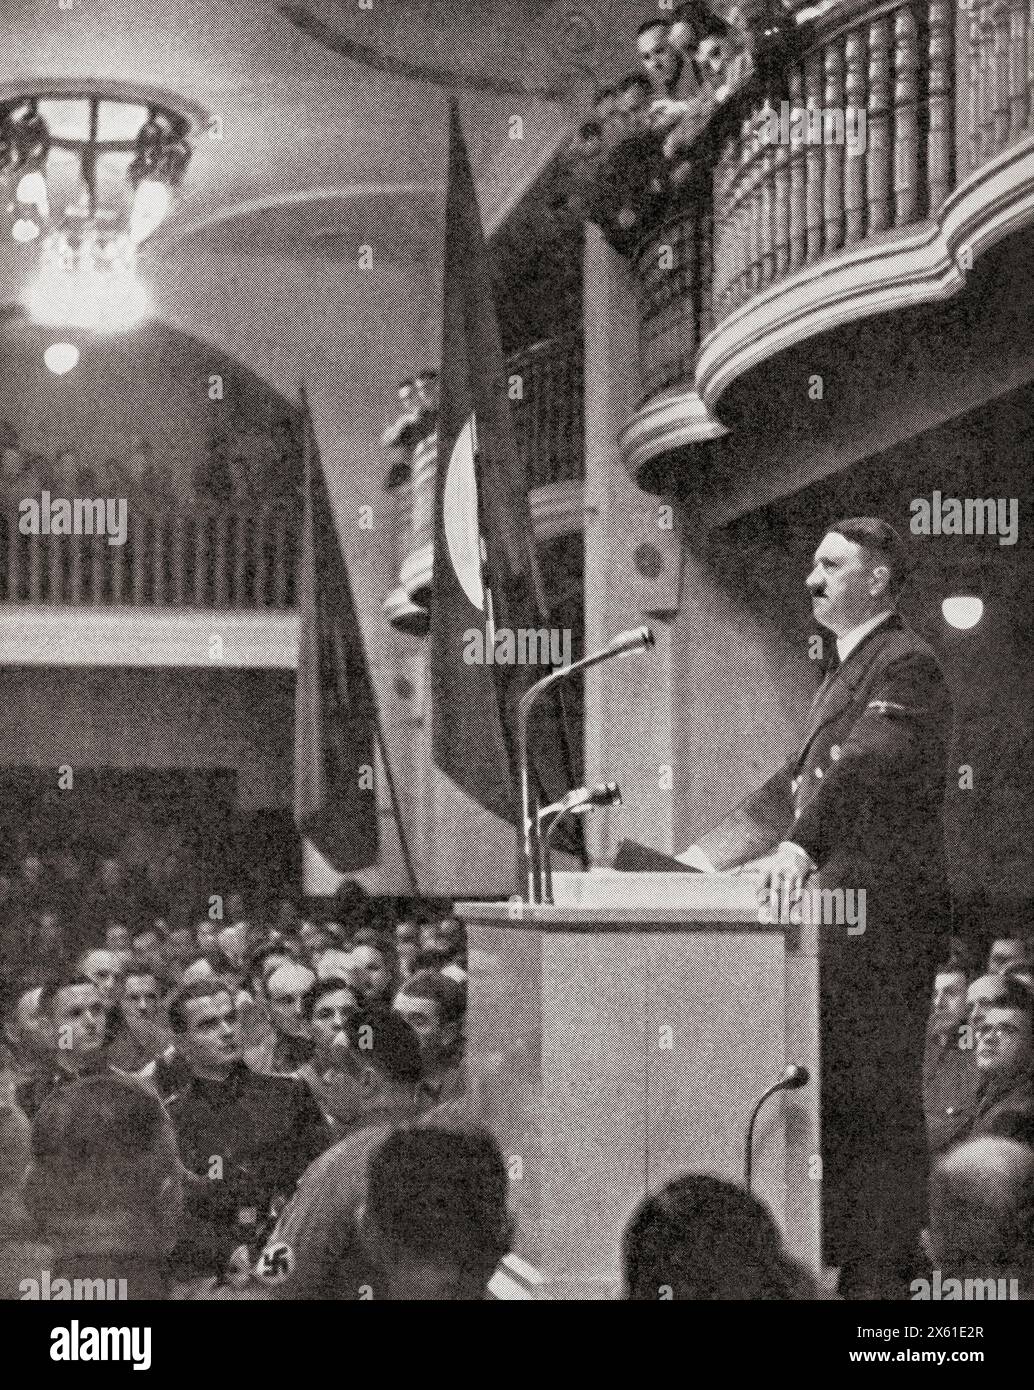 Adolf Hitler, seen here making a speech in the Buergerbraukeller, a beer hall in Munch, minutes before a bomb exploded shattering the building, thereby escaping an assassination attempt by Georg Elser, 8th November, 1939. Adolf Hitler, 1889 – 1945. German politician, demagogue, Pan-German revolutionary, leader of the Nazi Party, Chancellor of Germany, and Führer of Nazi Germany from 1934 to 1945. From The War in Pictures, First Year. Stock Photo